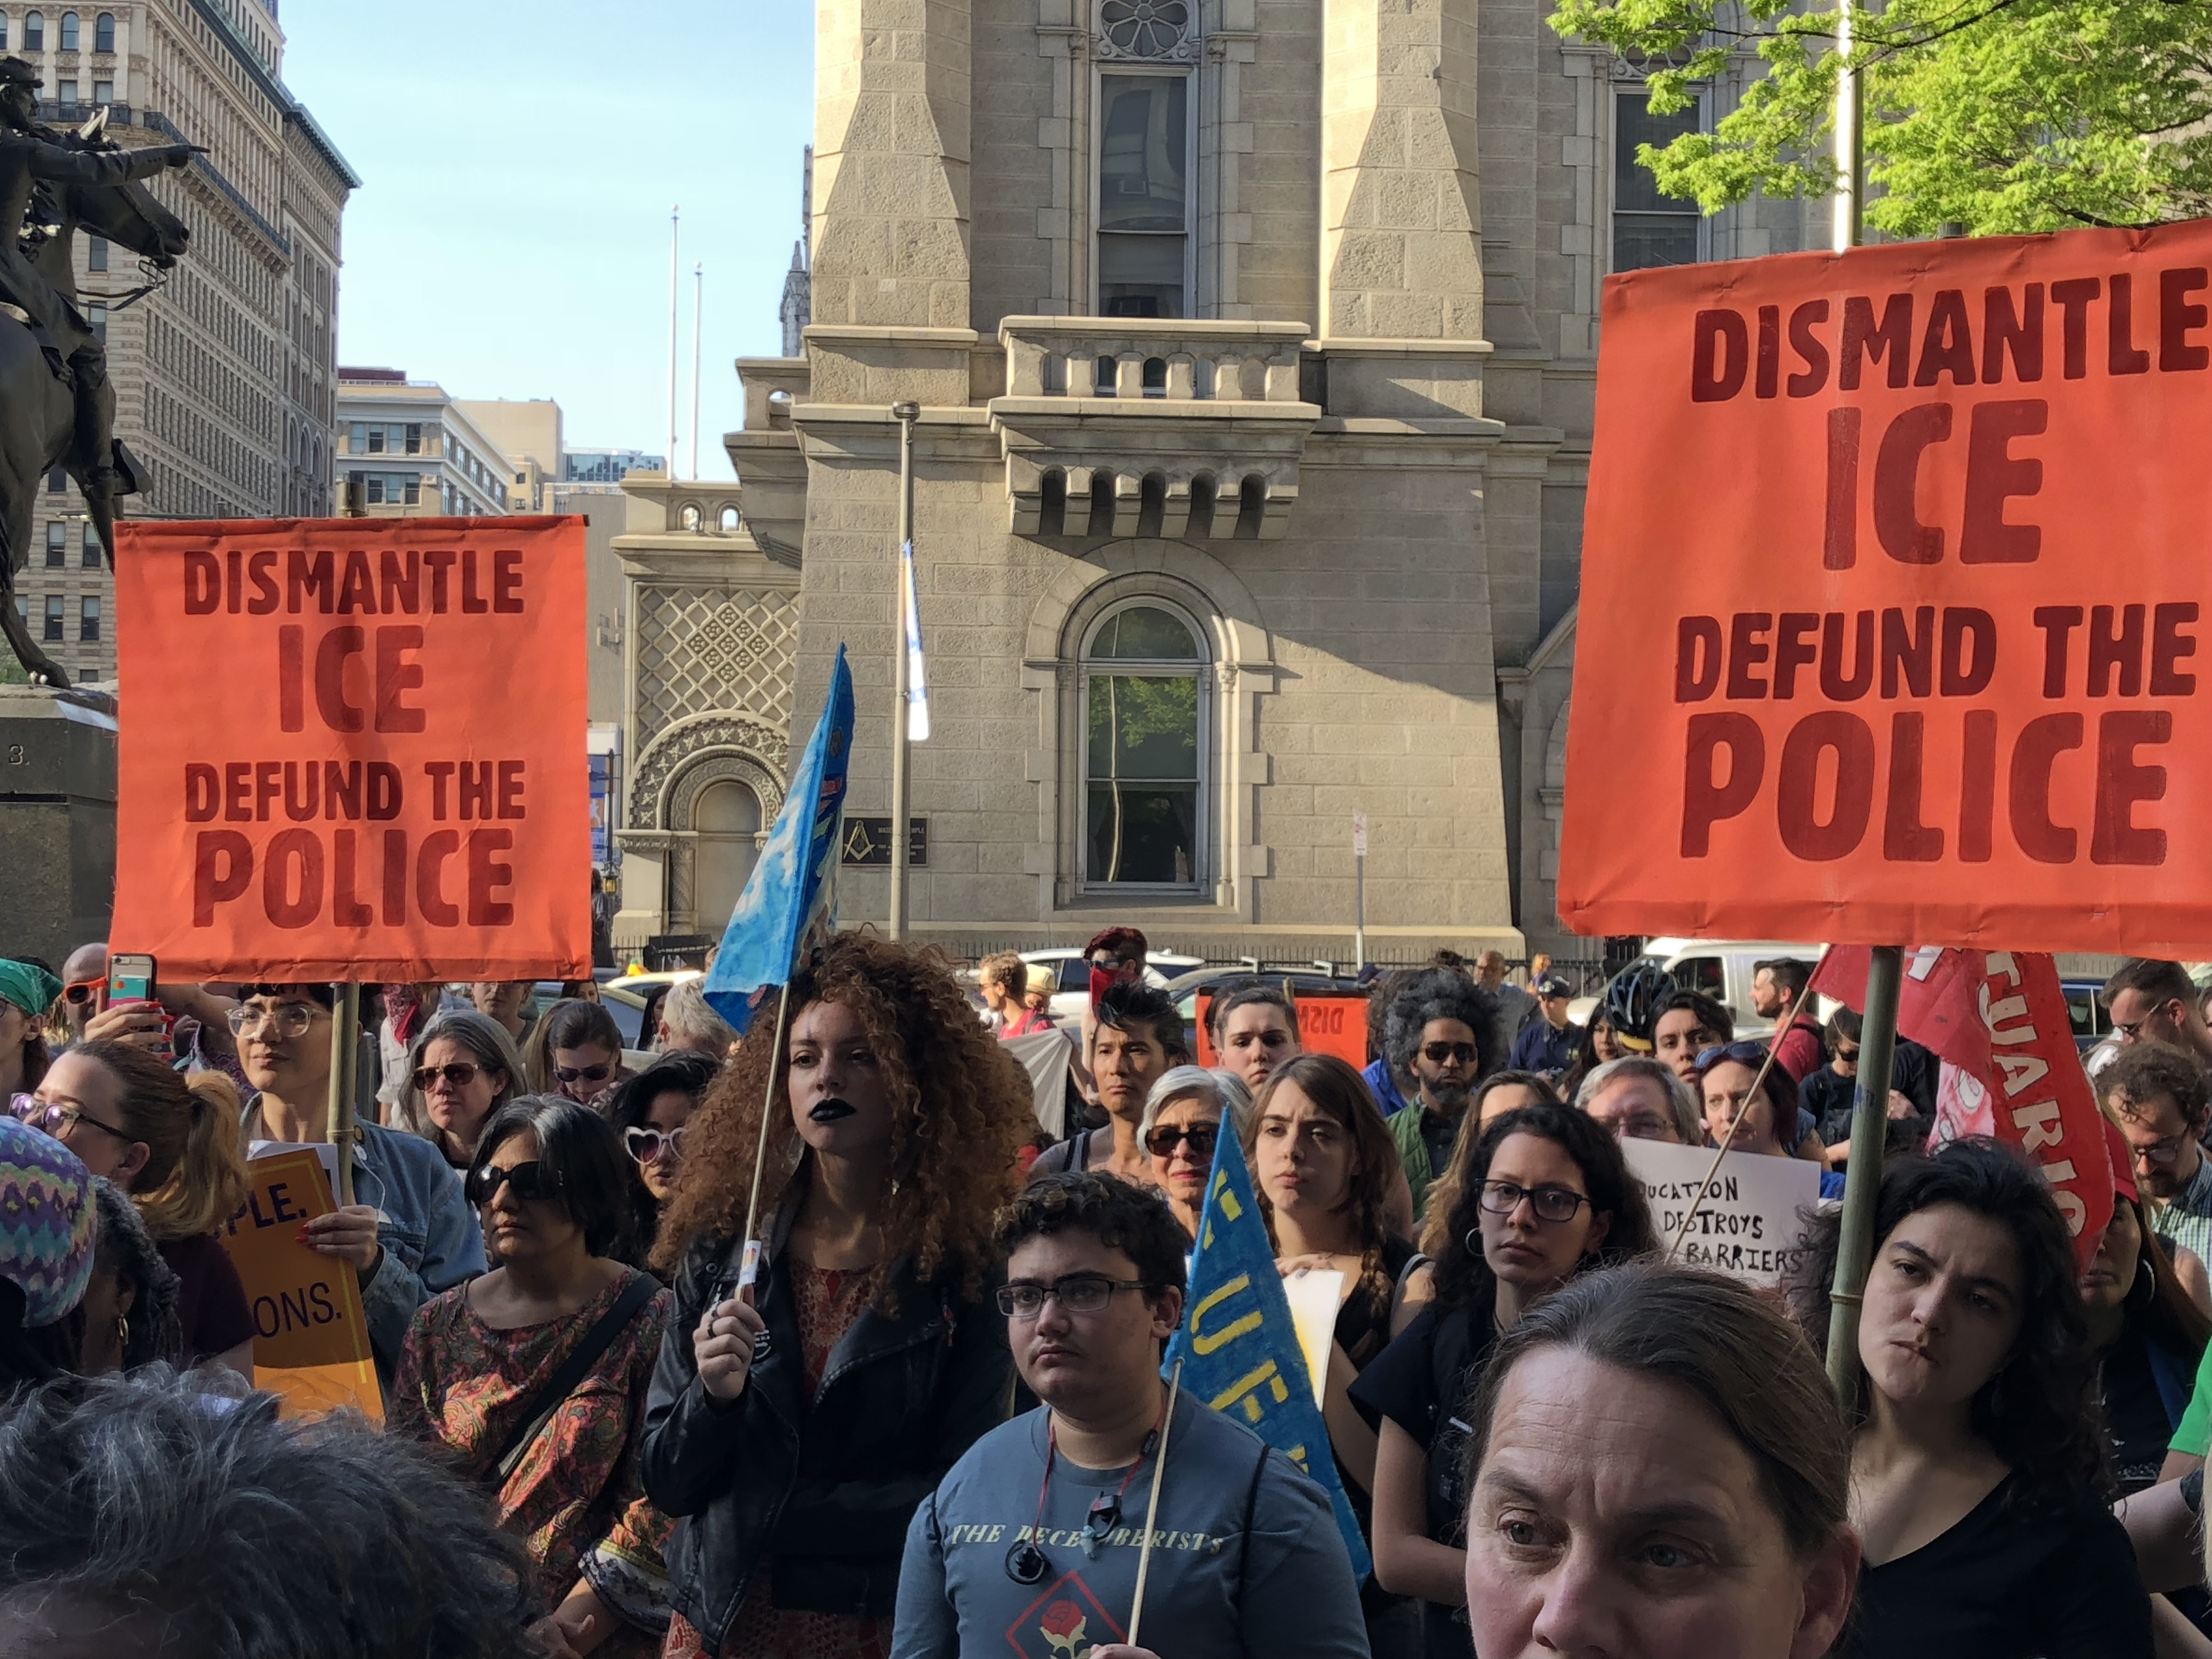 People gather at a protest with banners that read 'Dismantle Ice, Defund the Police'